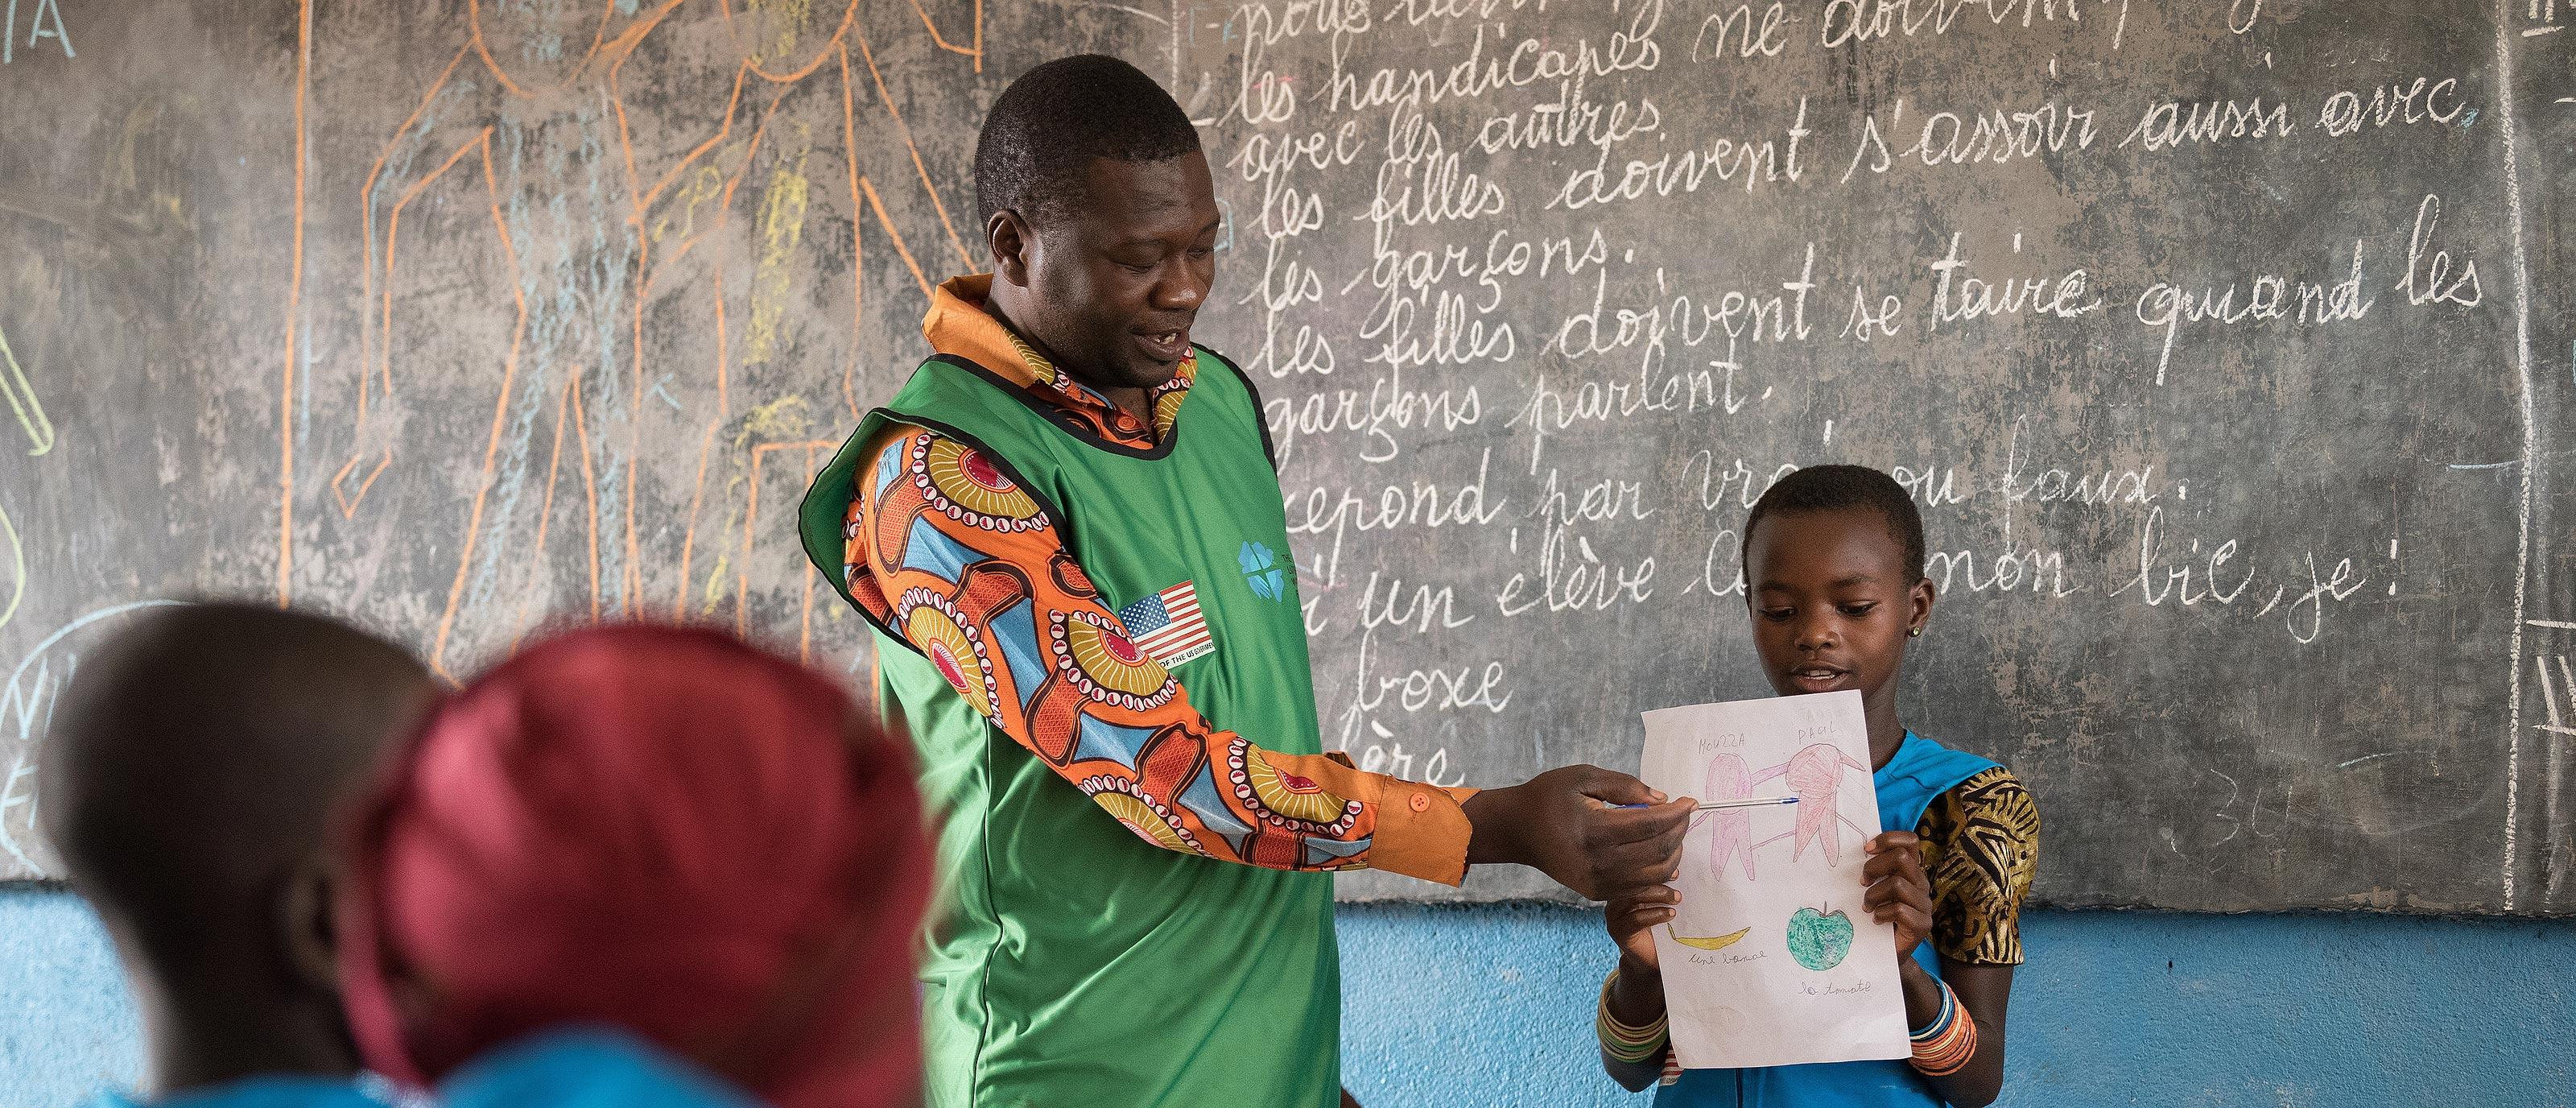 Painter and consulting artist Dogari Samson teaches children how to make drawings as a way to share messages of peace. All photos: LWF/Albin Hillert